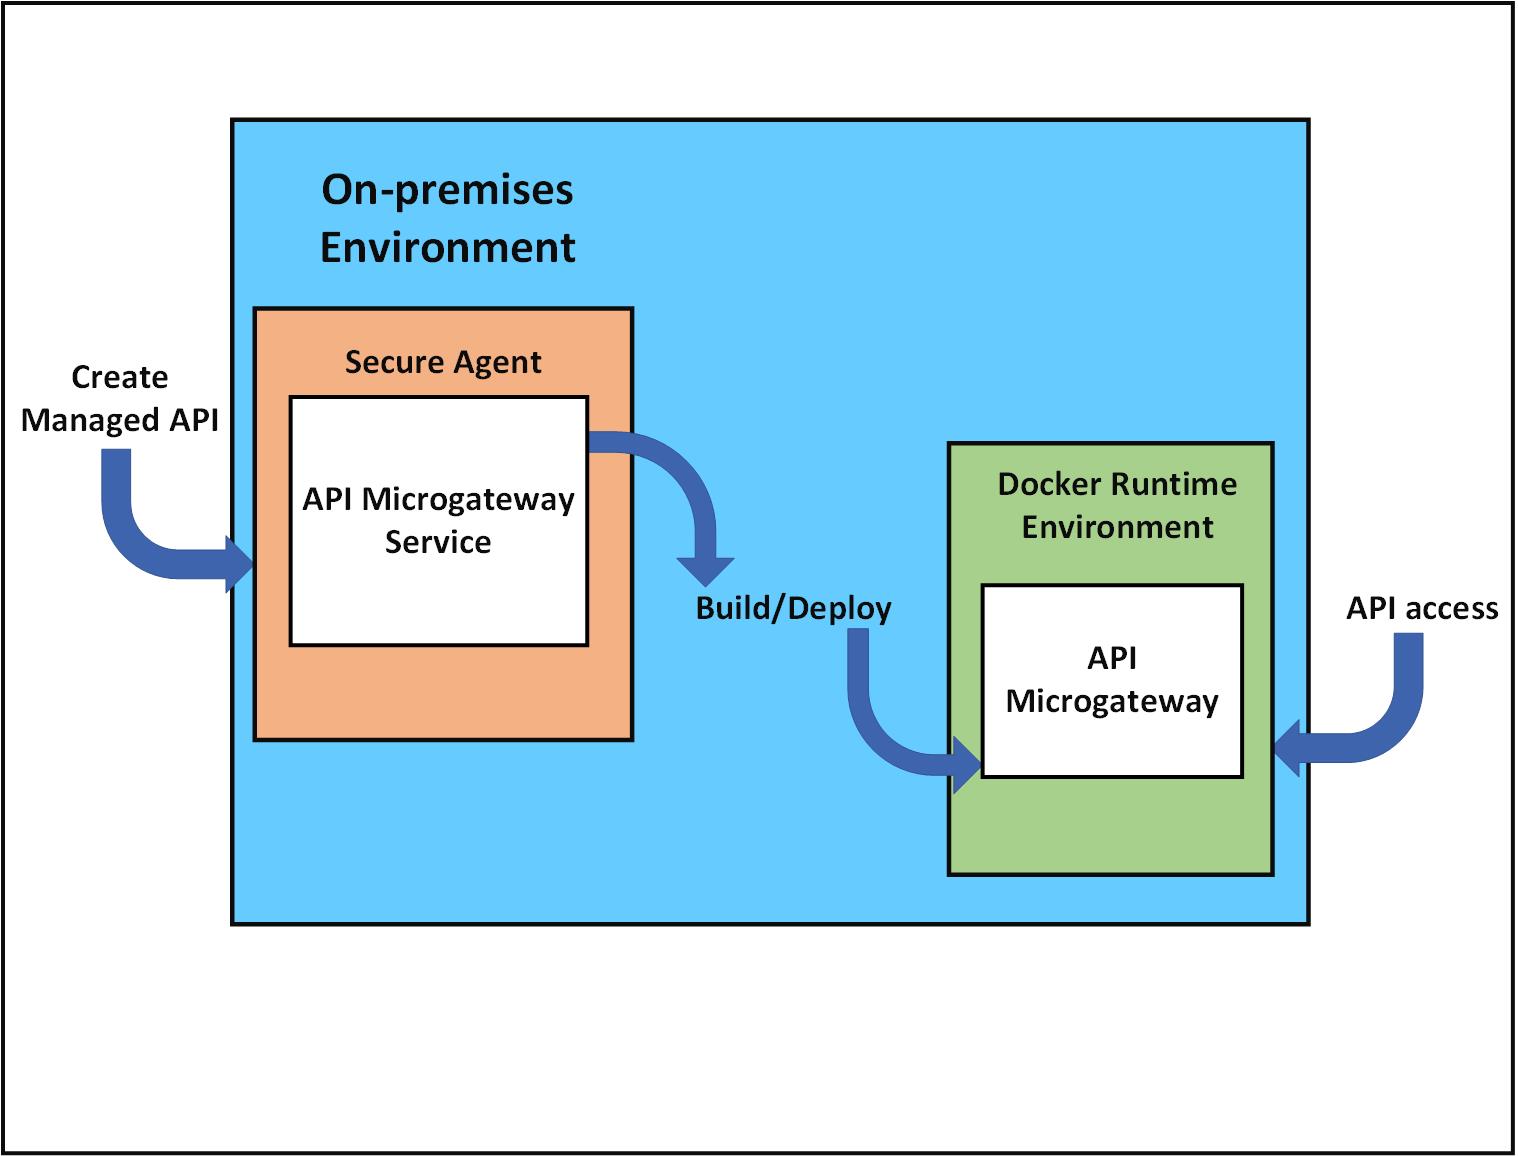 The diagram shows the API Microgateway Service and API Microgateway components exposing a managed API in the on-premises environment. 
			 